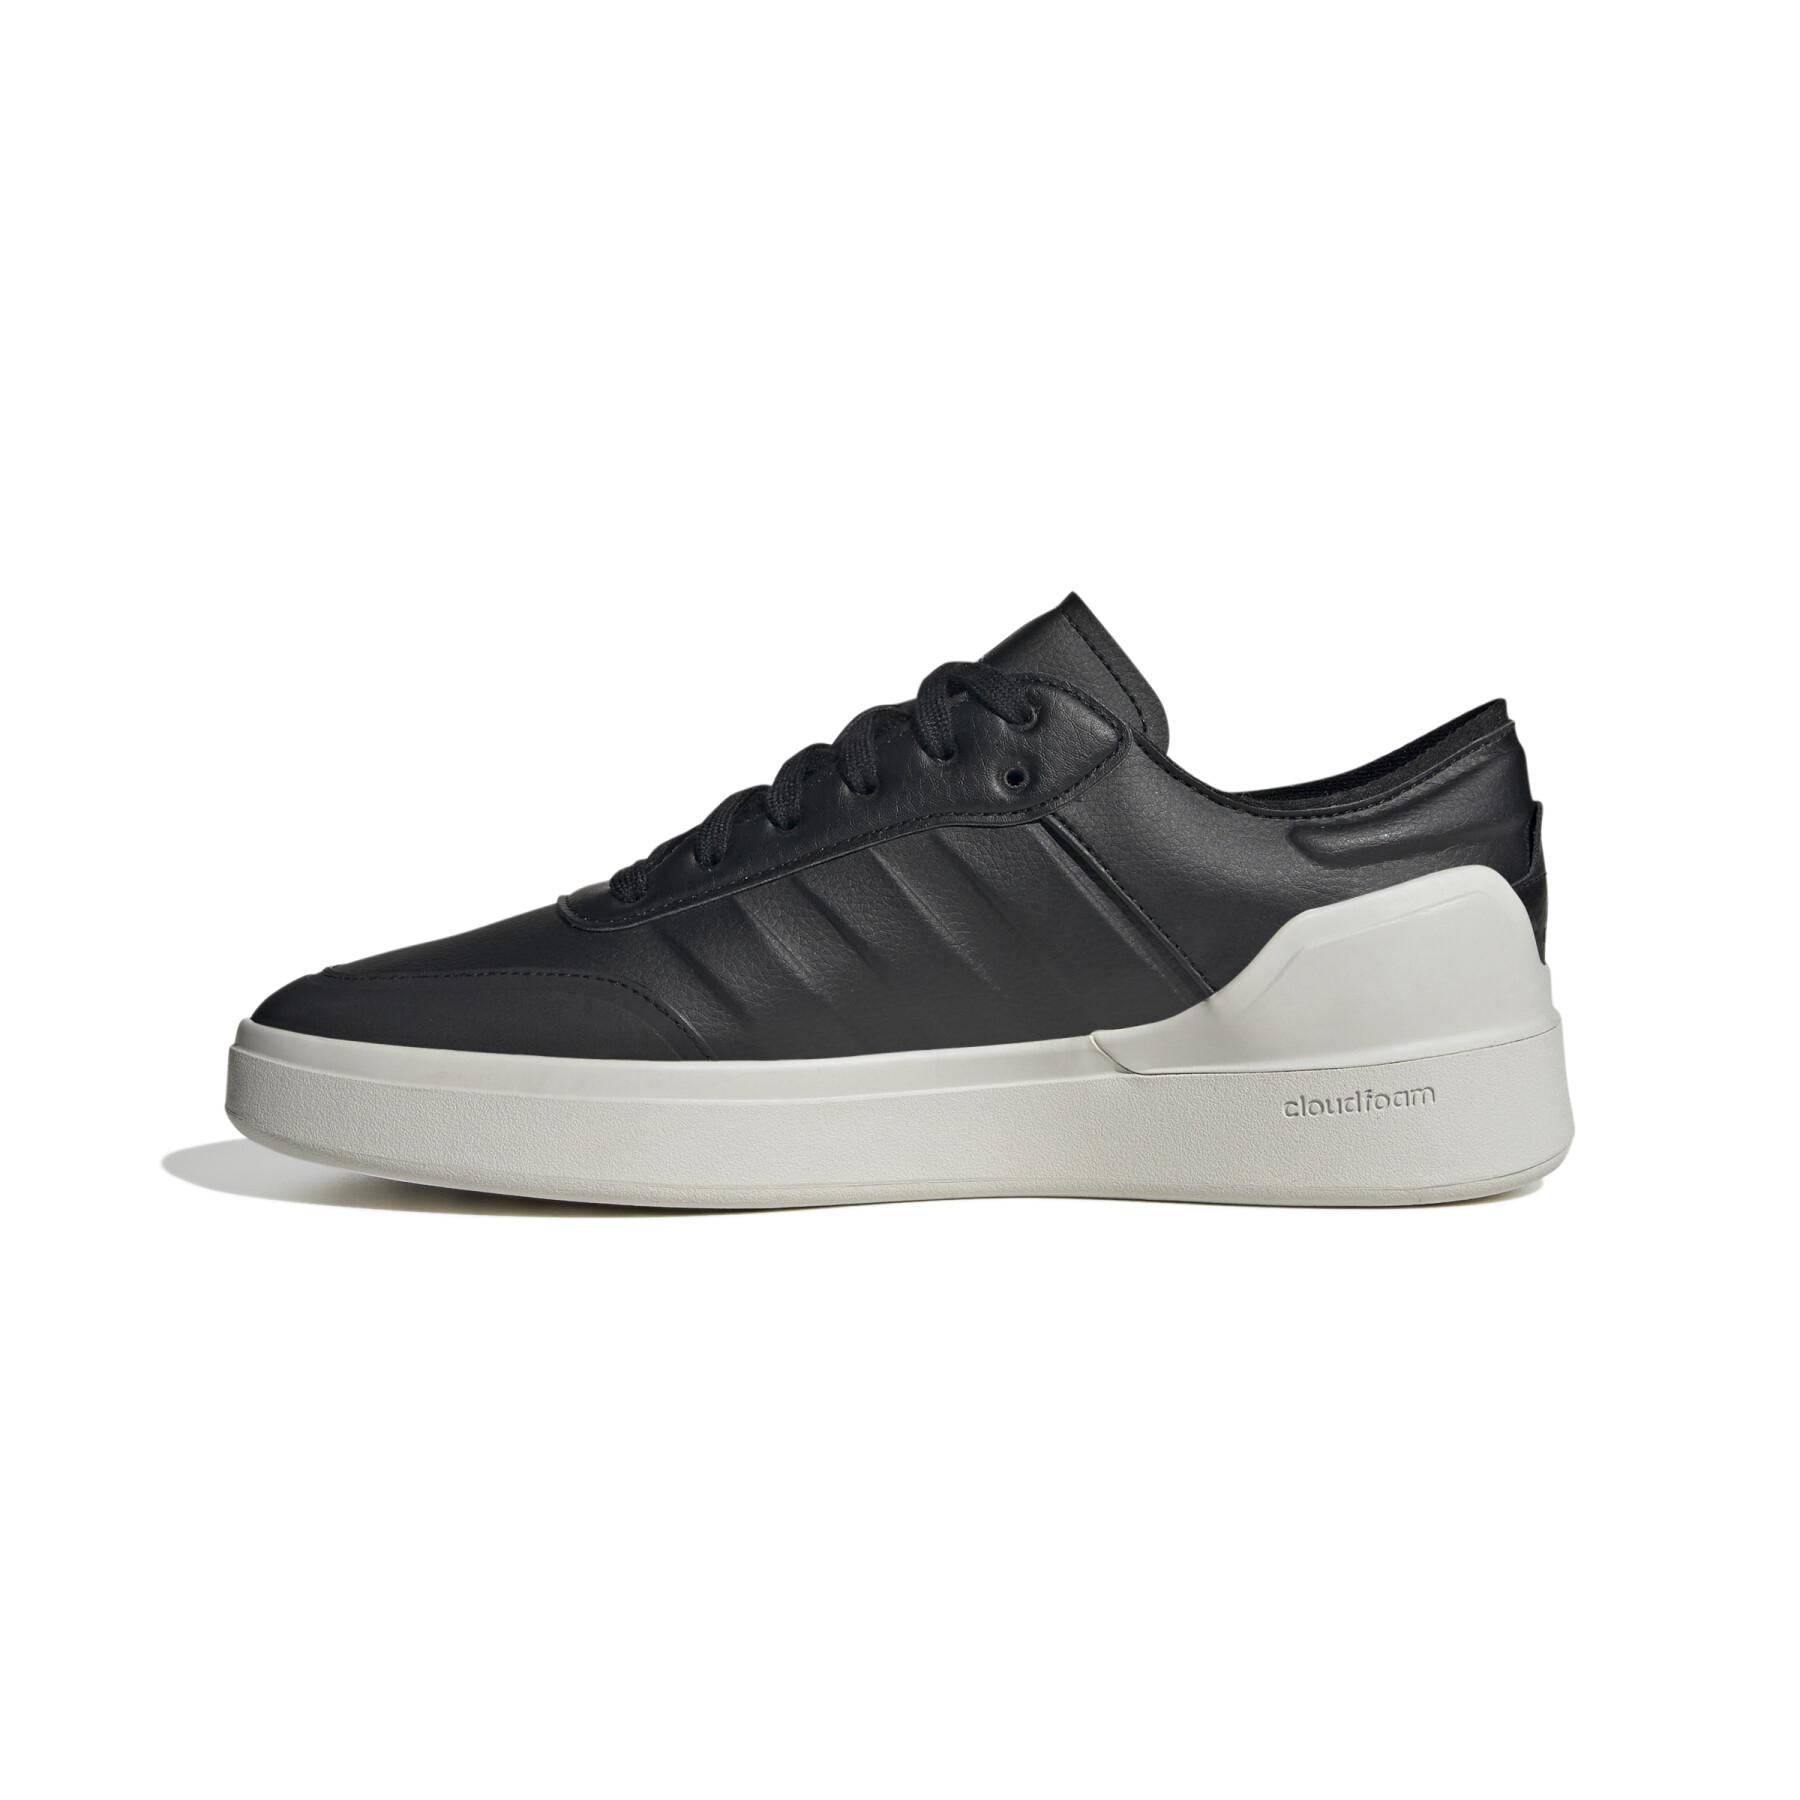 Sneakers adidas Court Revival